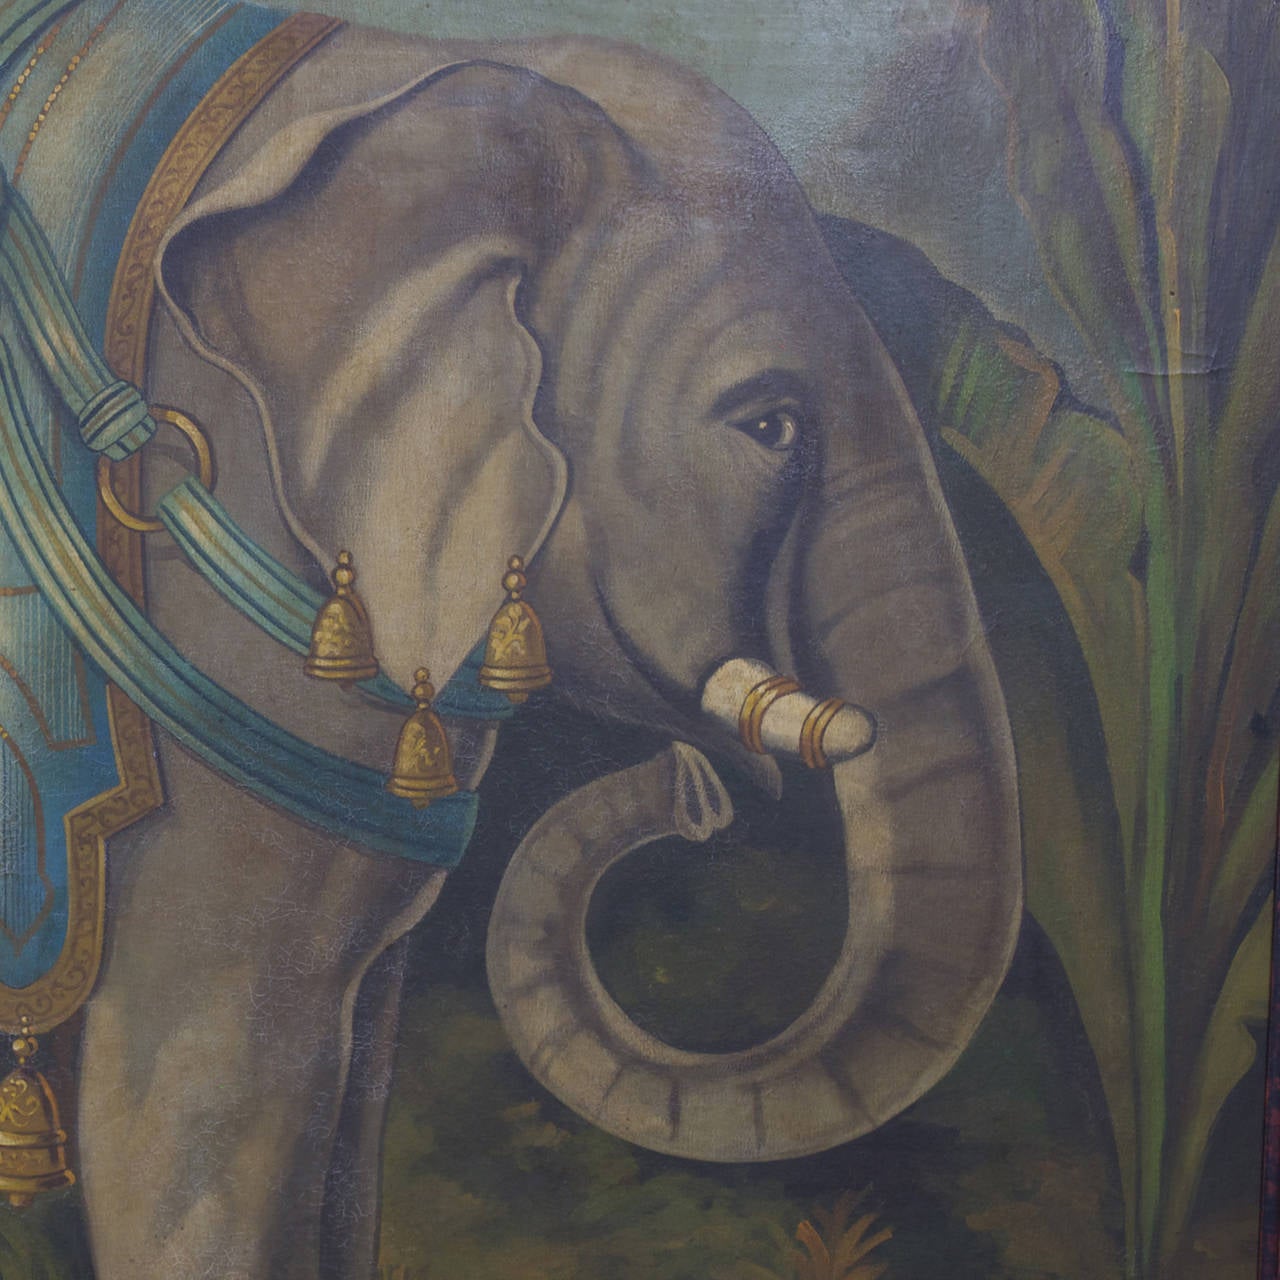 Large, oil on canvas painting, with great folk appeal, of a proud elephant decked out in fancy colorful attire and ready for adventure. Profiled in a tropical setting, set against a blue sky. Signed Skilling on the lower right. Original painted